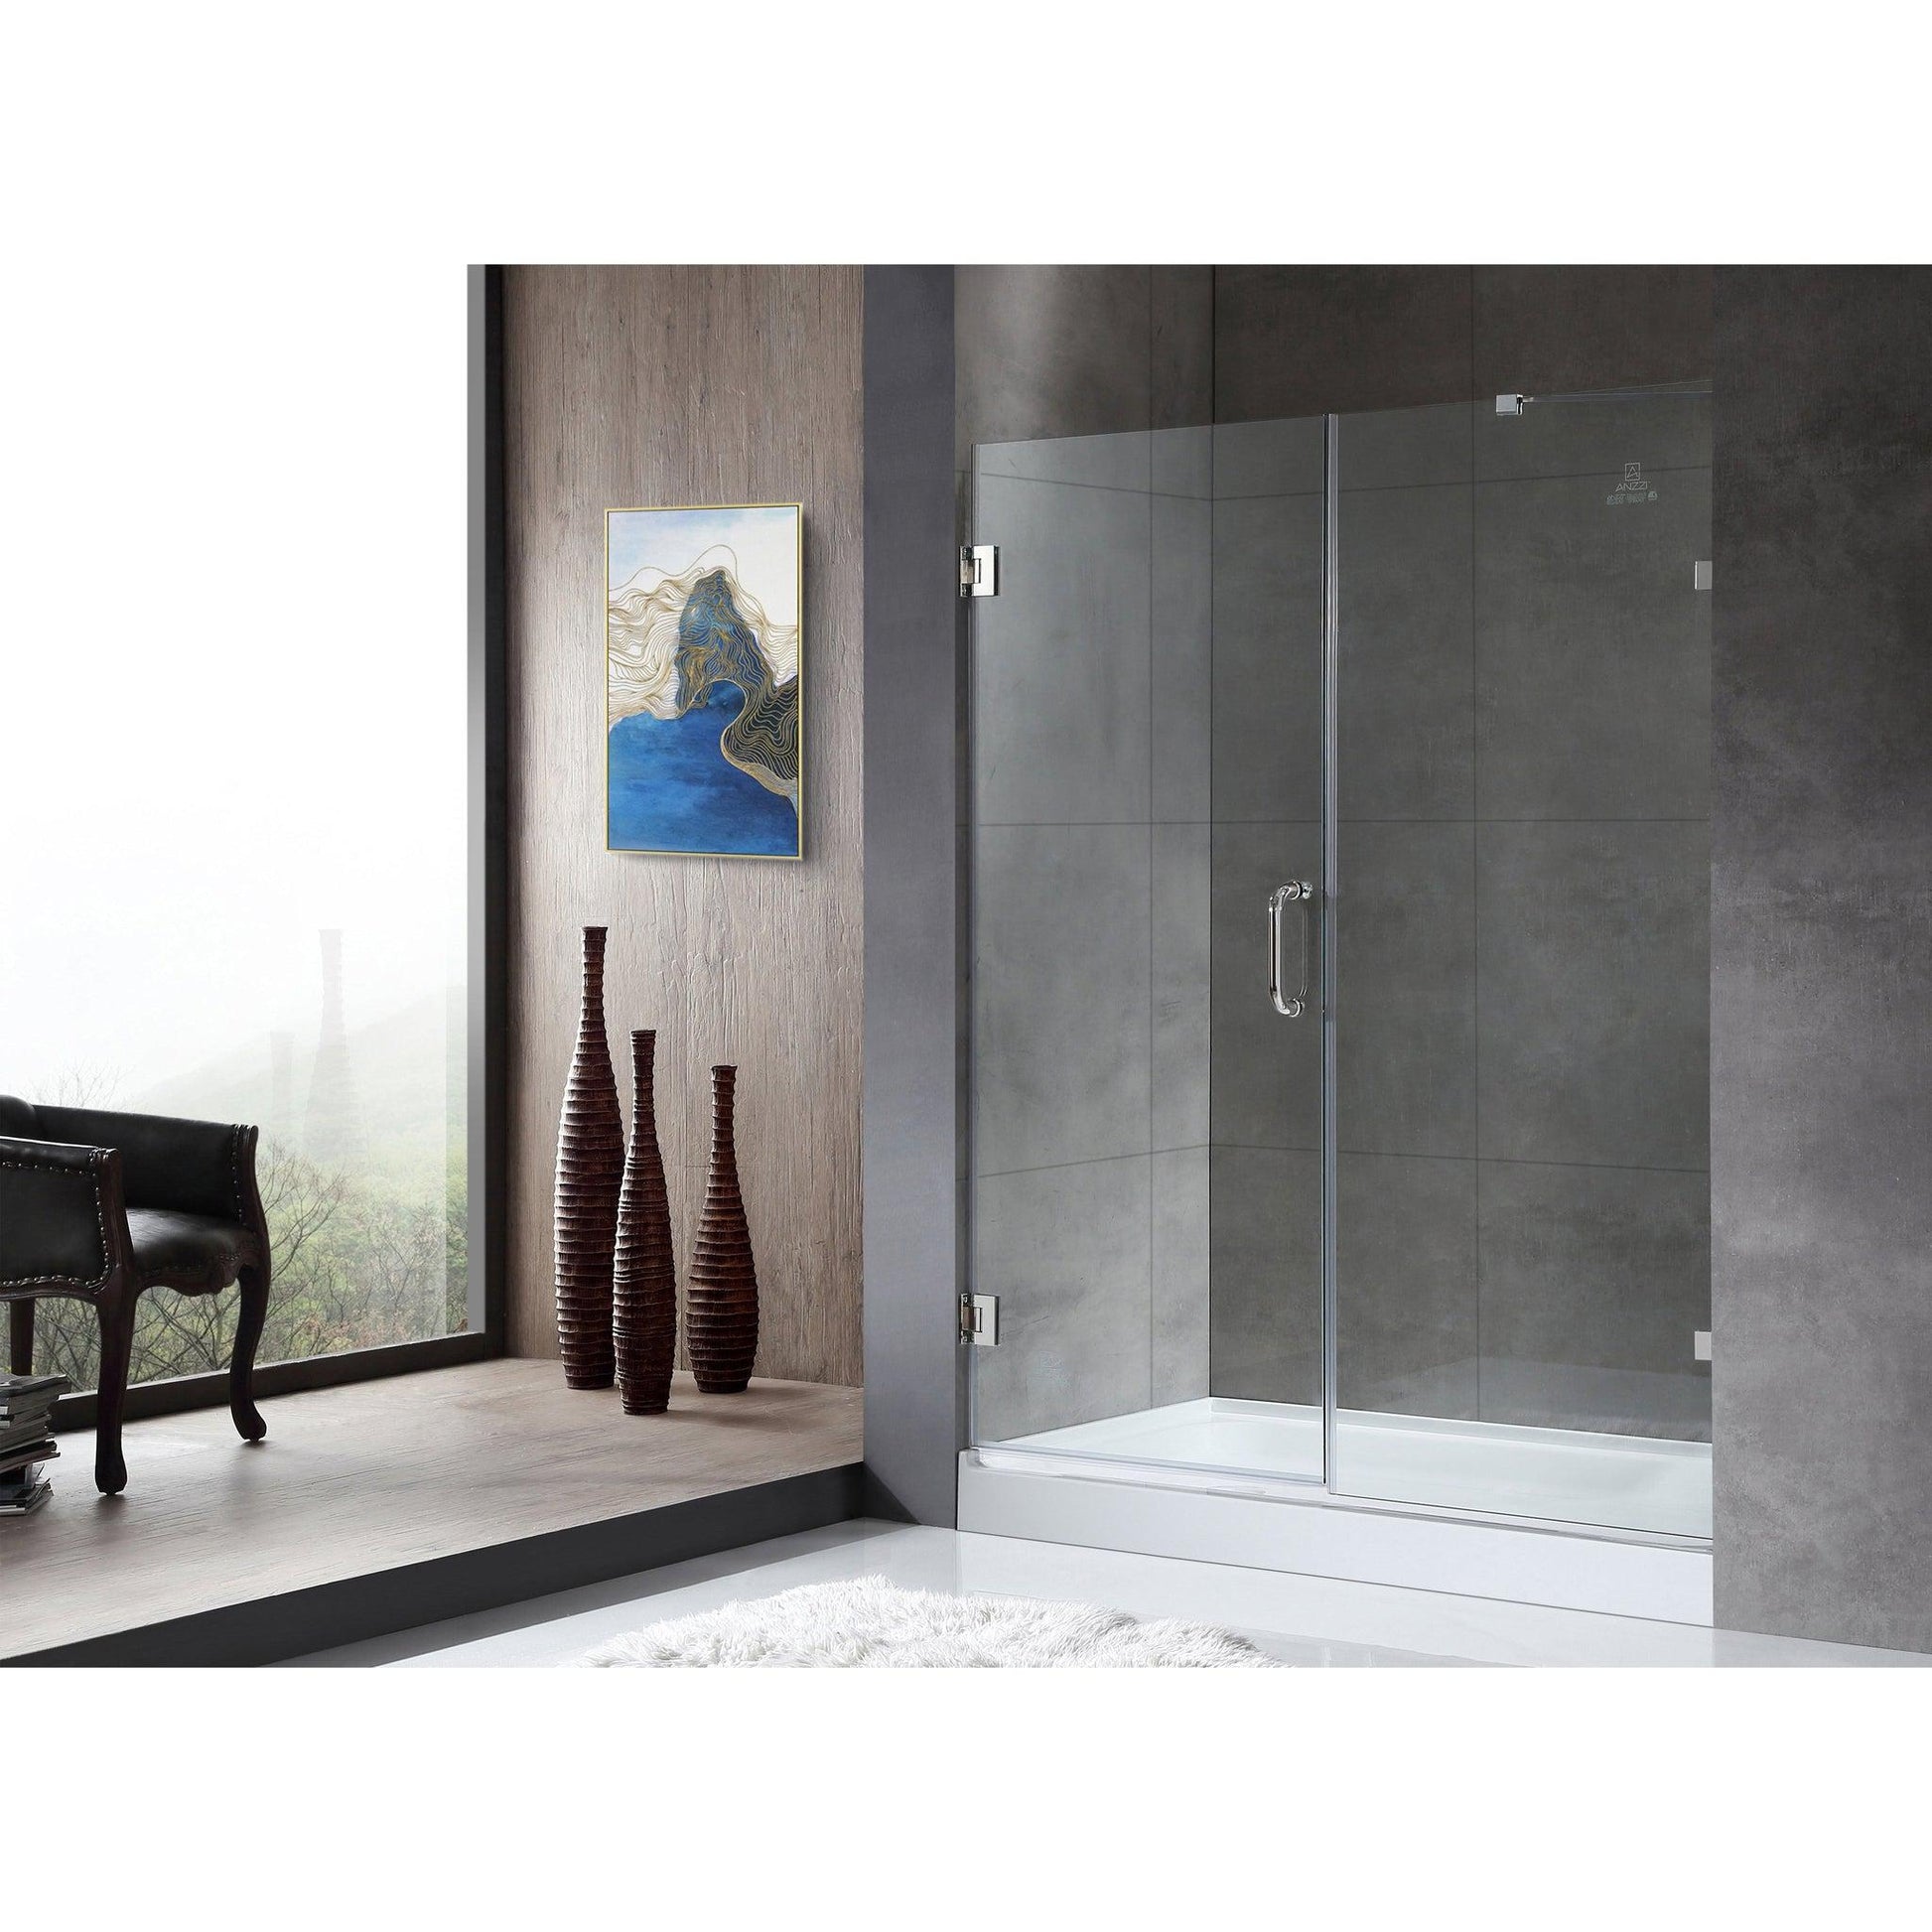 ANZZI Maverick Series 60" x 72" Frameless Alcove Polished Chrome Hinged Shower Door With Handle and Tsunami Guard